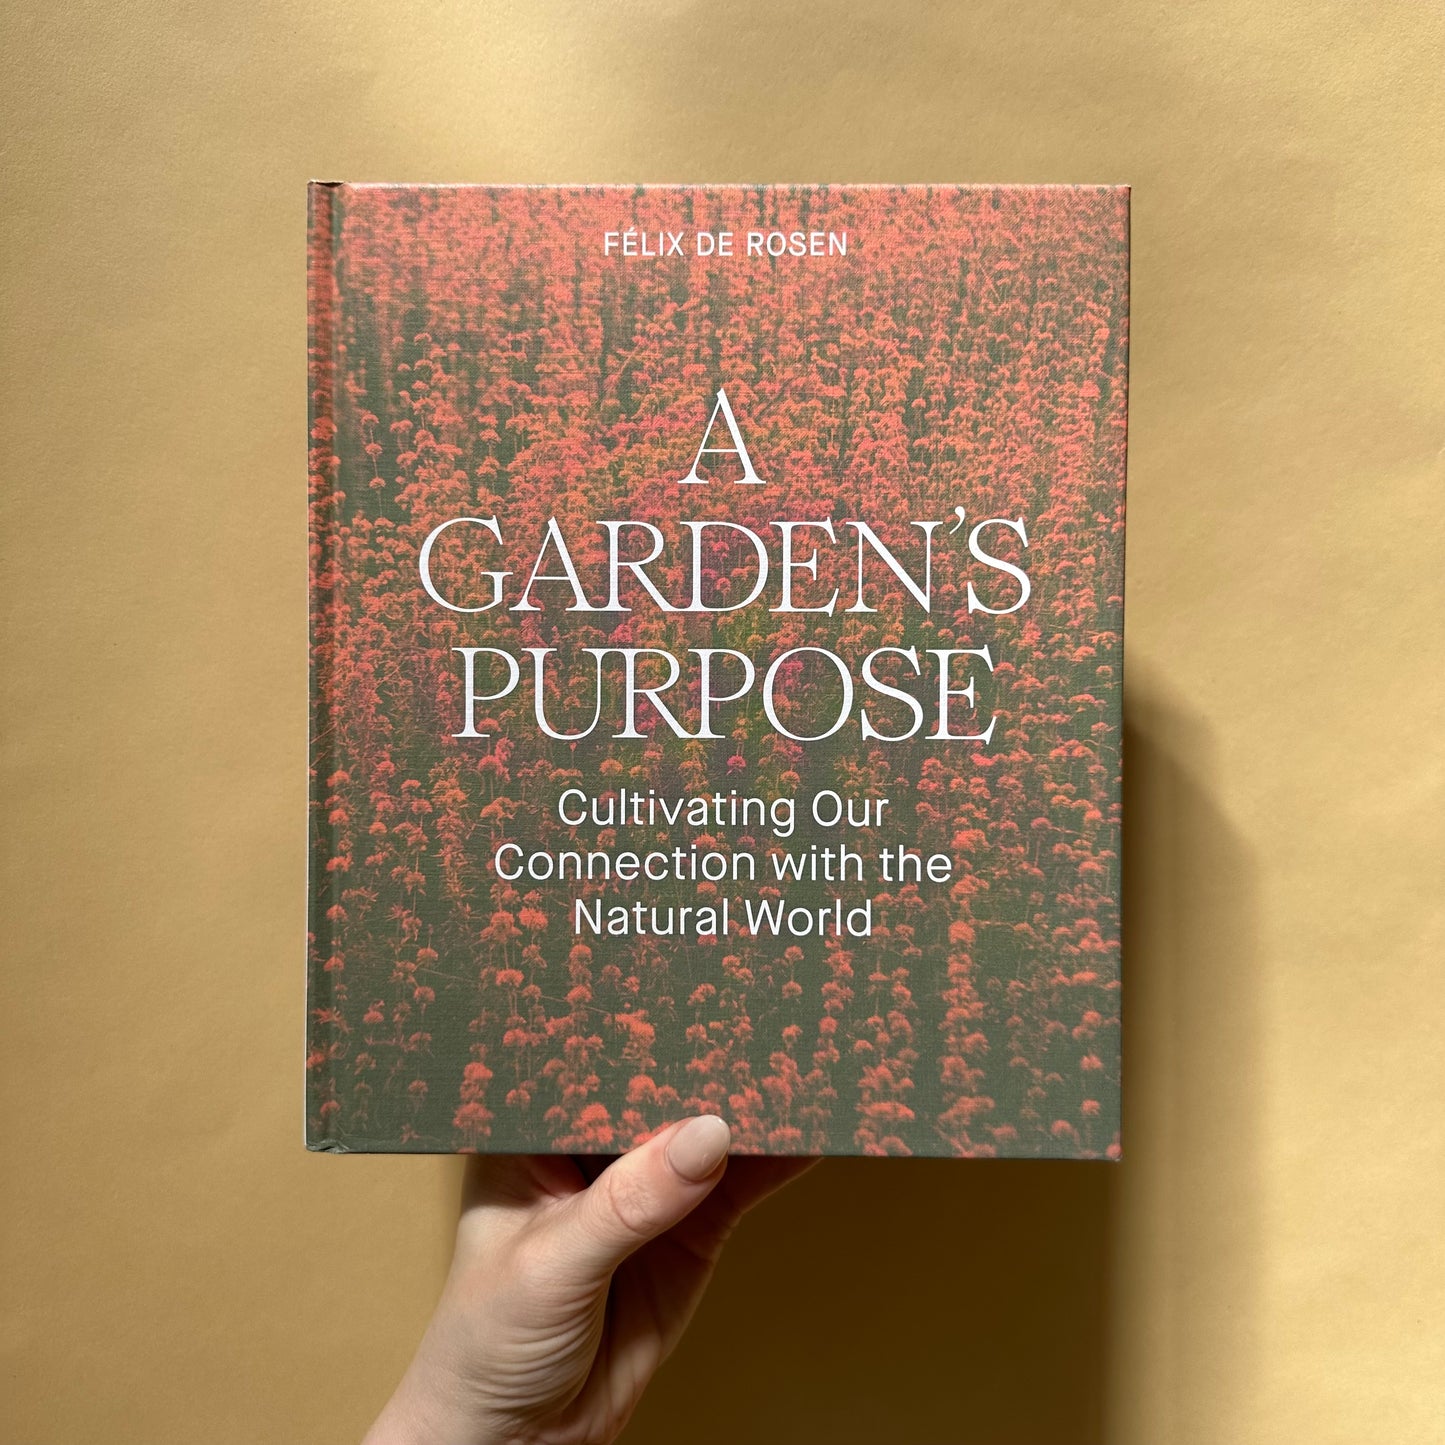 a garden's purpose: cultivating our connection with the natural world